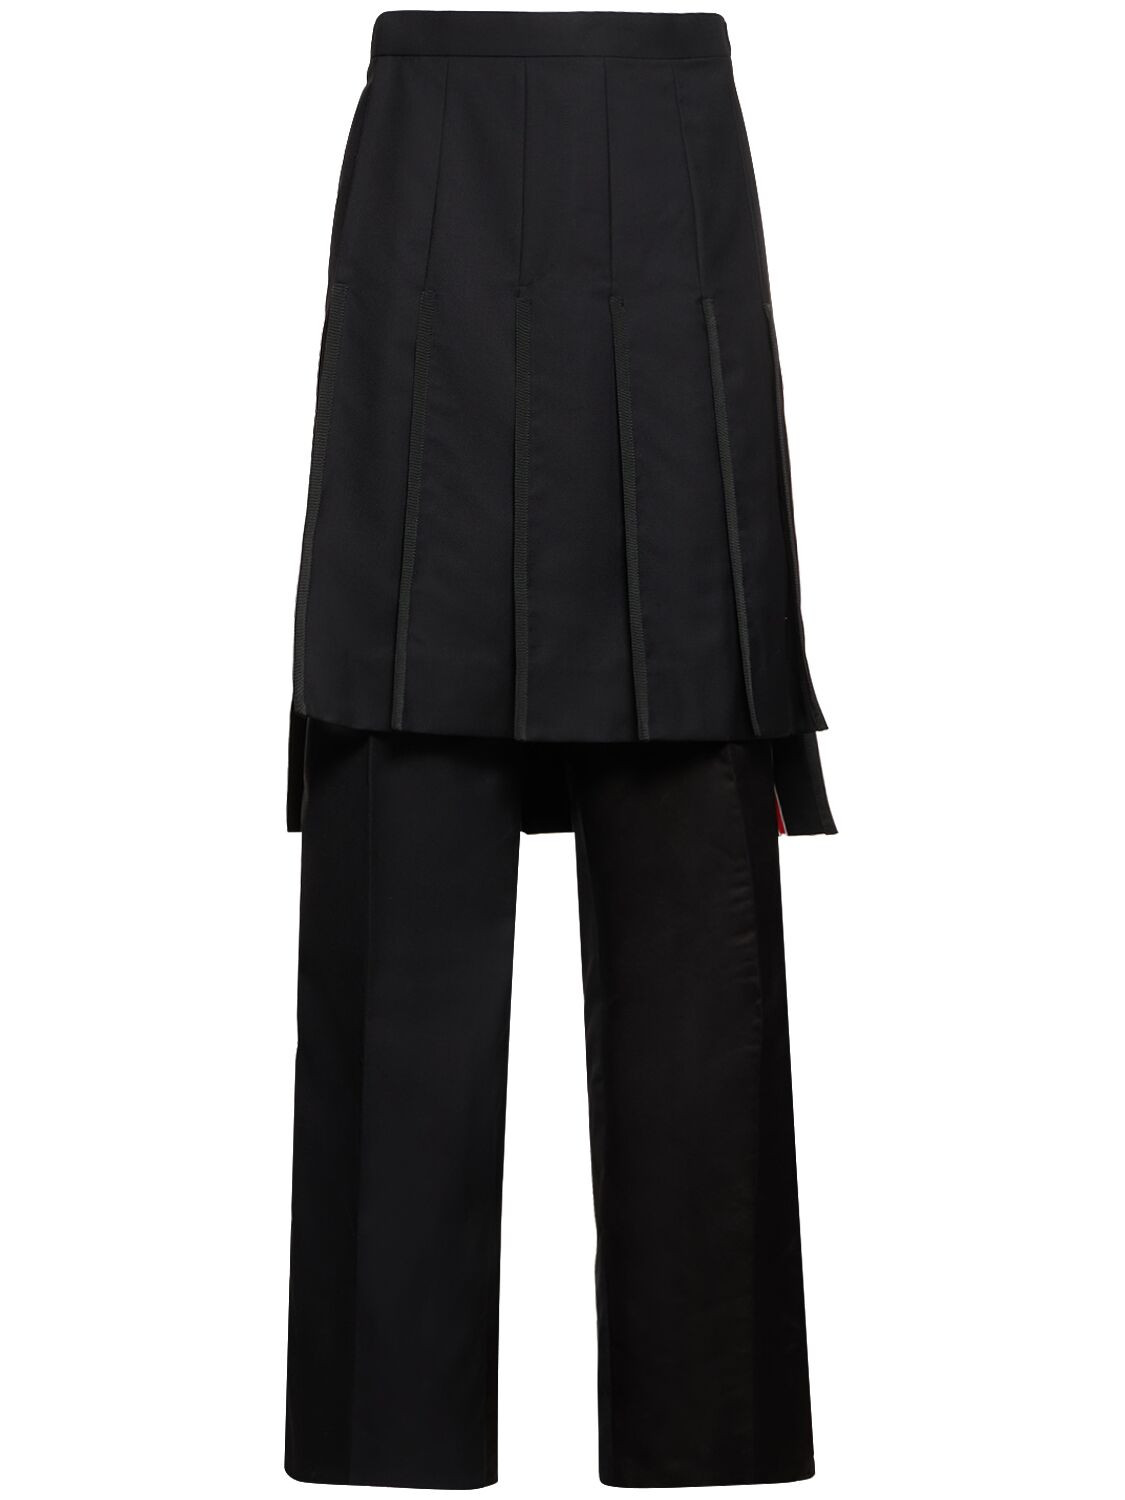 Collage Wool Pants W/ Pleated Skirt – MEN > CLOTHING > PANTS